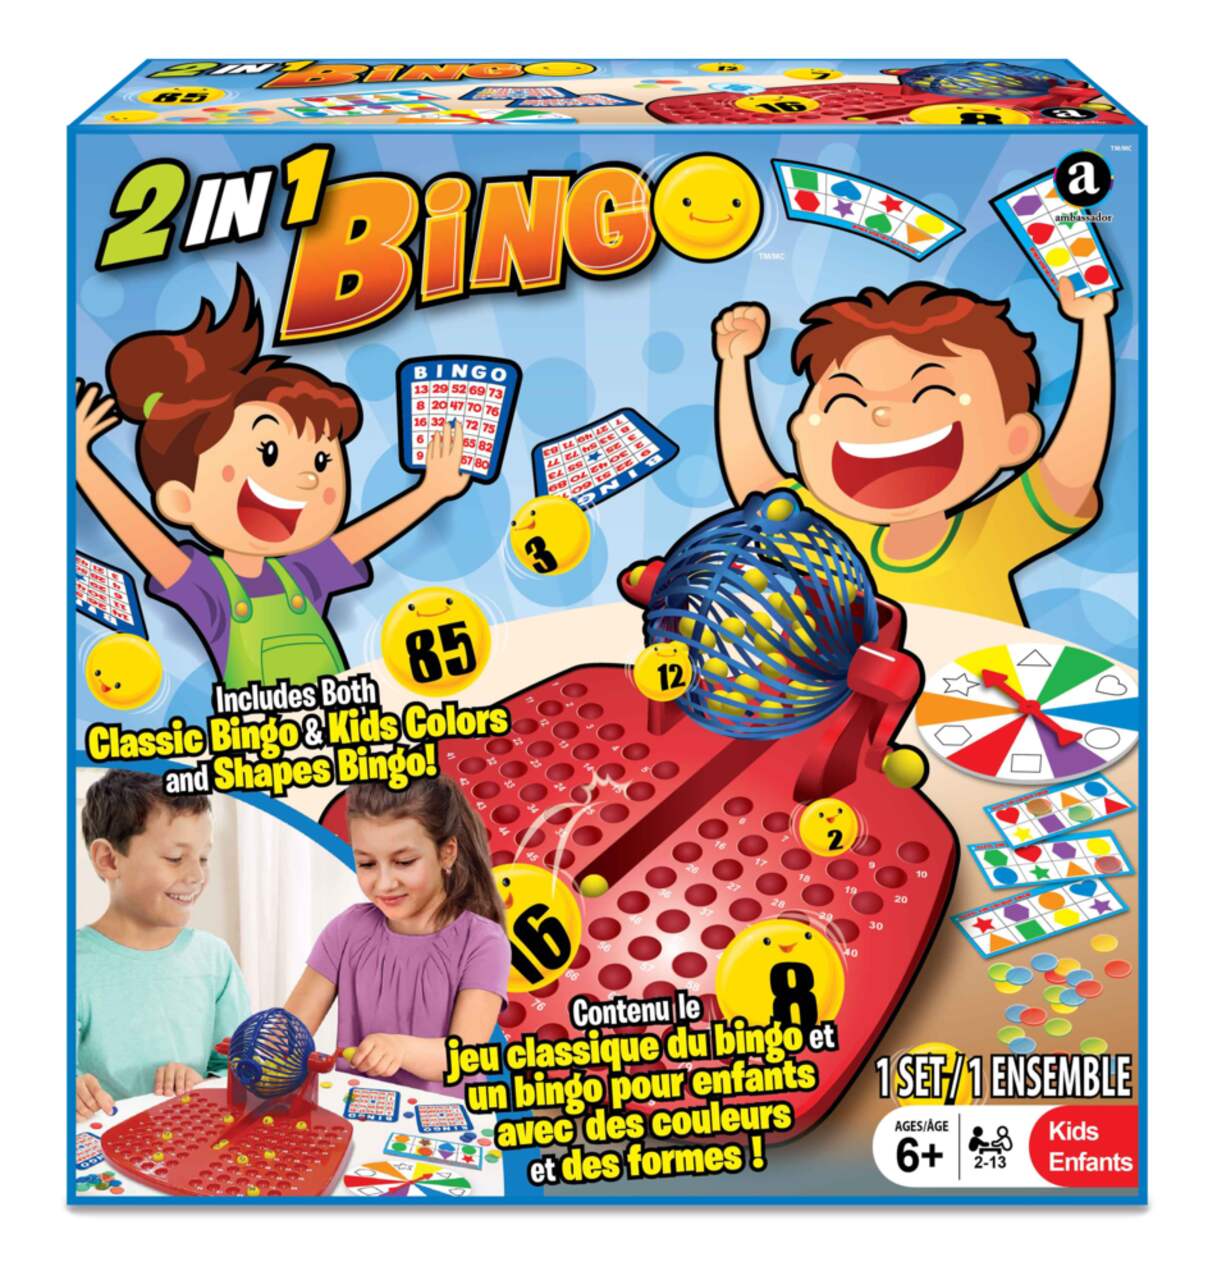 https://media-www.canadiantire.ca/product/seasonal-gardening/toys/toys-games/0508144/2-in-1-bingo-6bf5b676-72f1-4bd8-97cf-d0c563015fbe.png?imdensity=1&imwidth=640&impolicy=mZoom